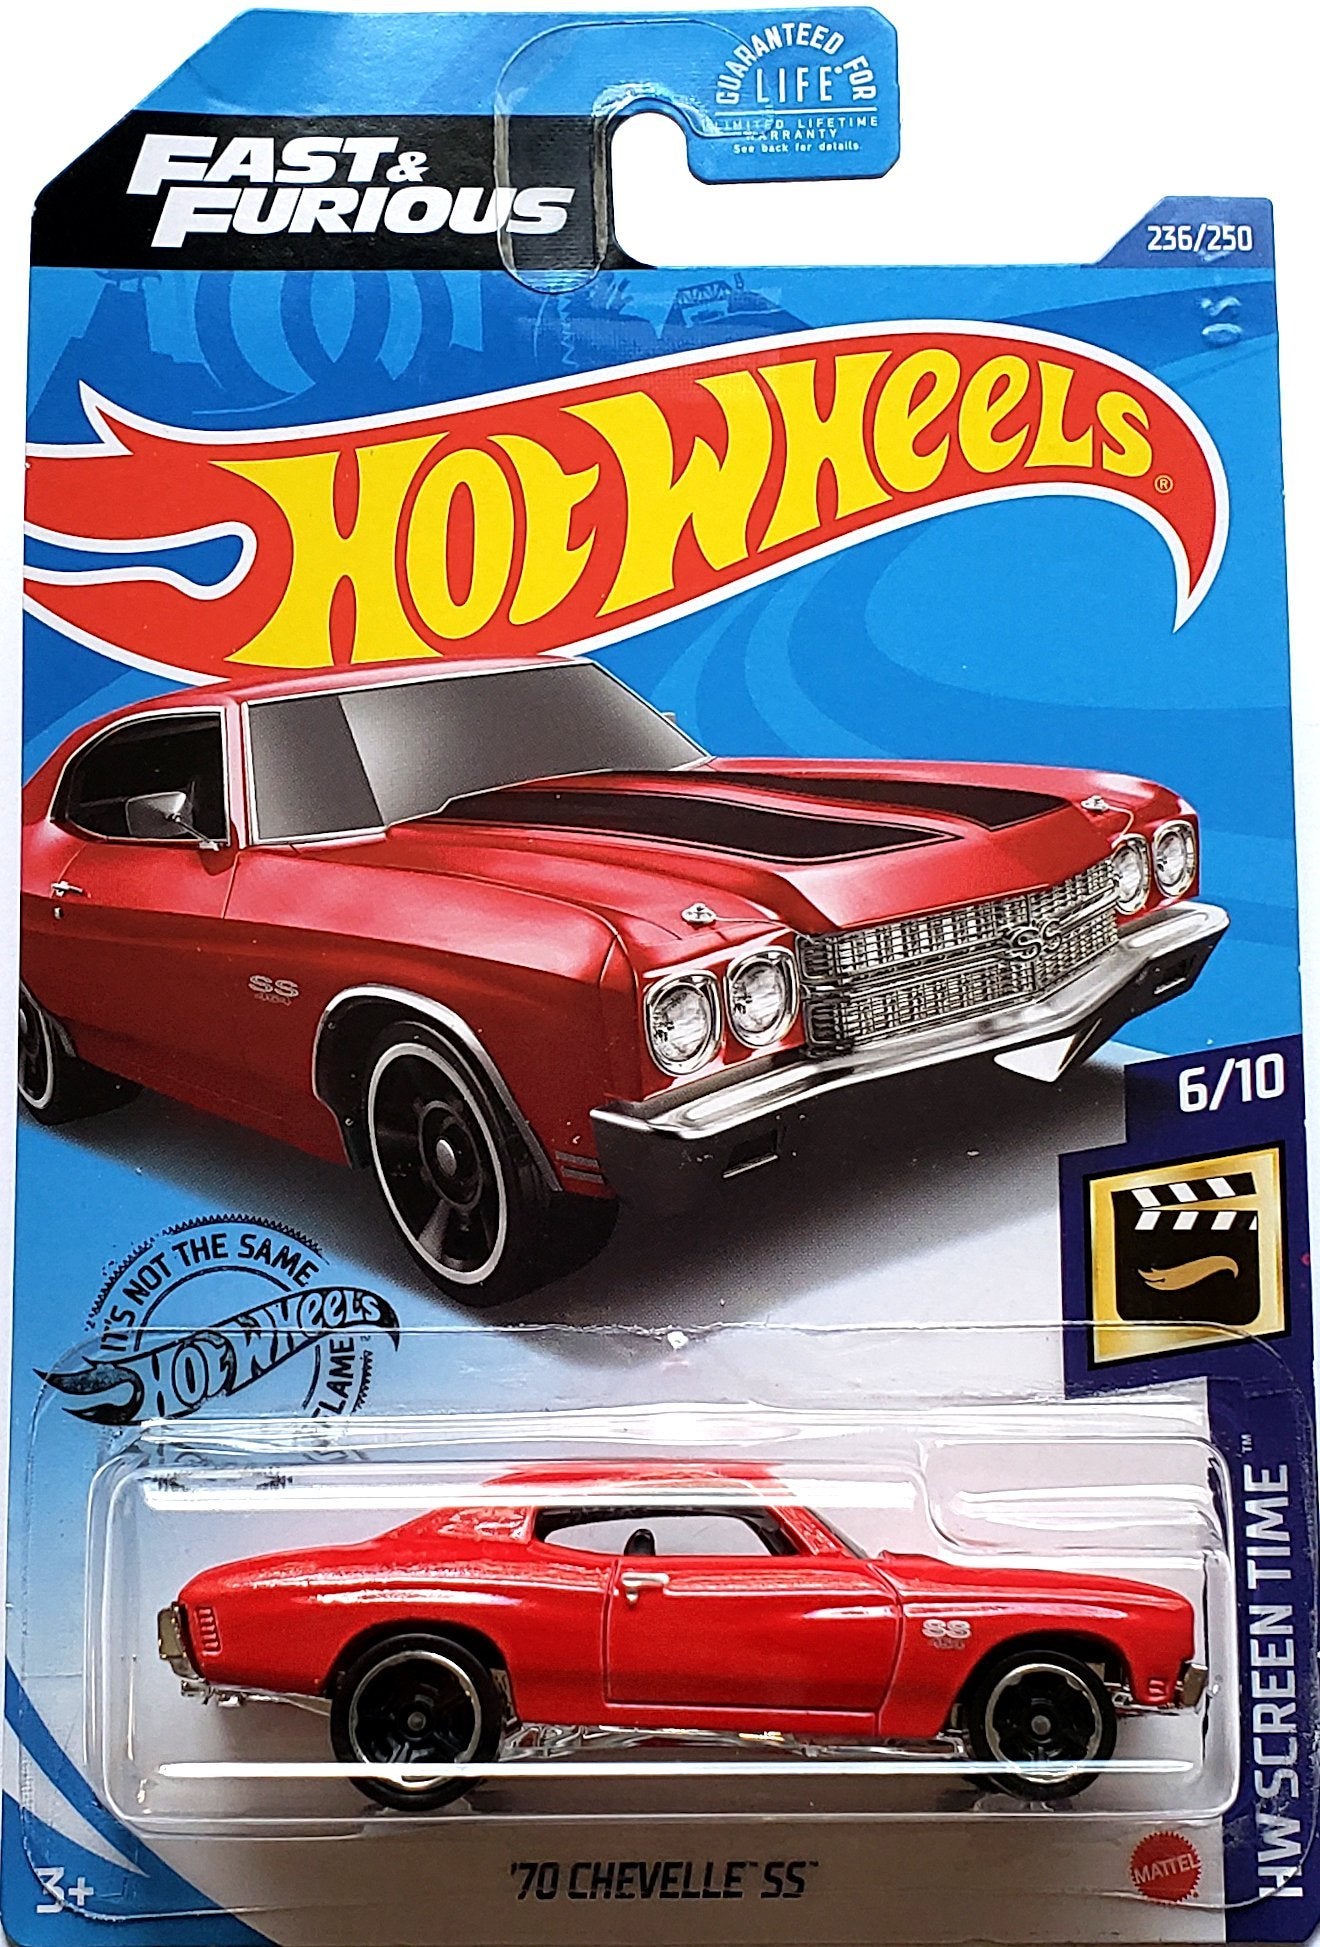 2020 Hot Wheels Mainline #236 - 1970 Chevy Chevelle SS (Fast & Furious Red) GHC78